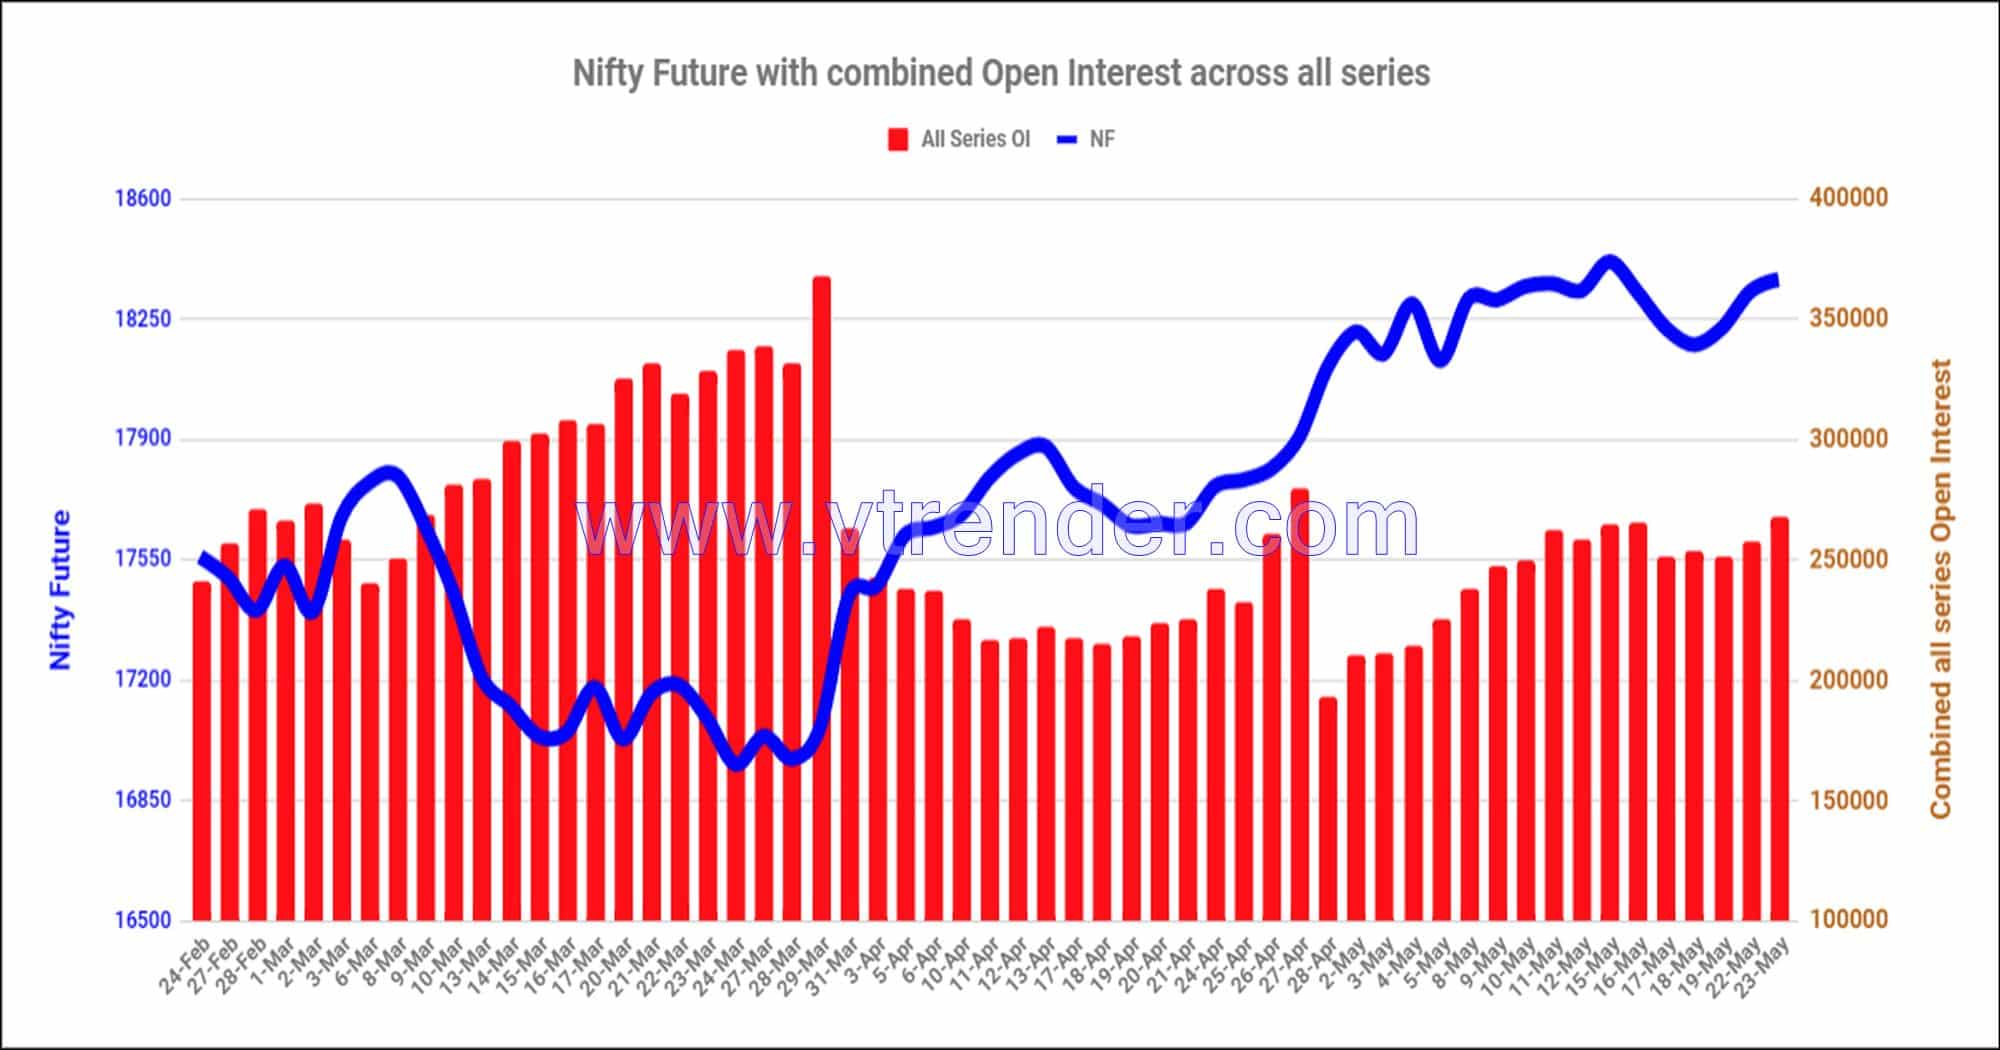 Nf23May Nifty And Banknifty Futures With All Series Combined Open Interest – 23Rd May 2023 Banknifty, Nifty, Open Interest